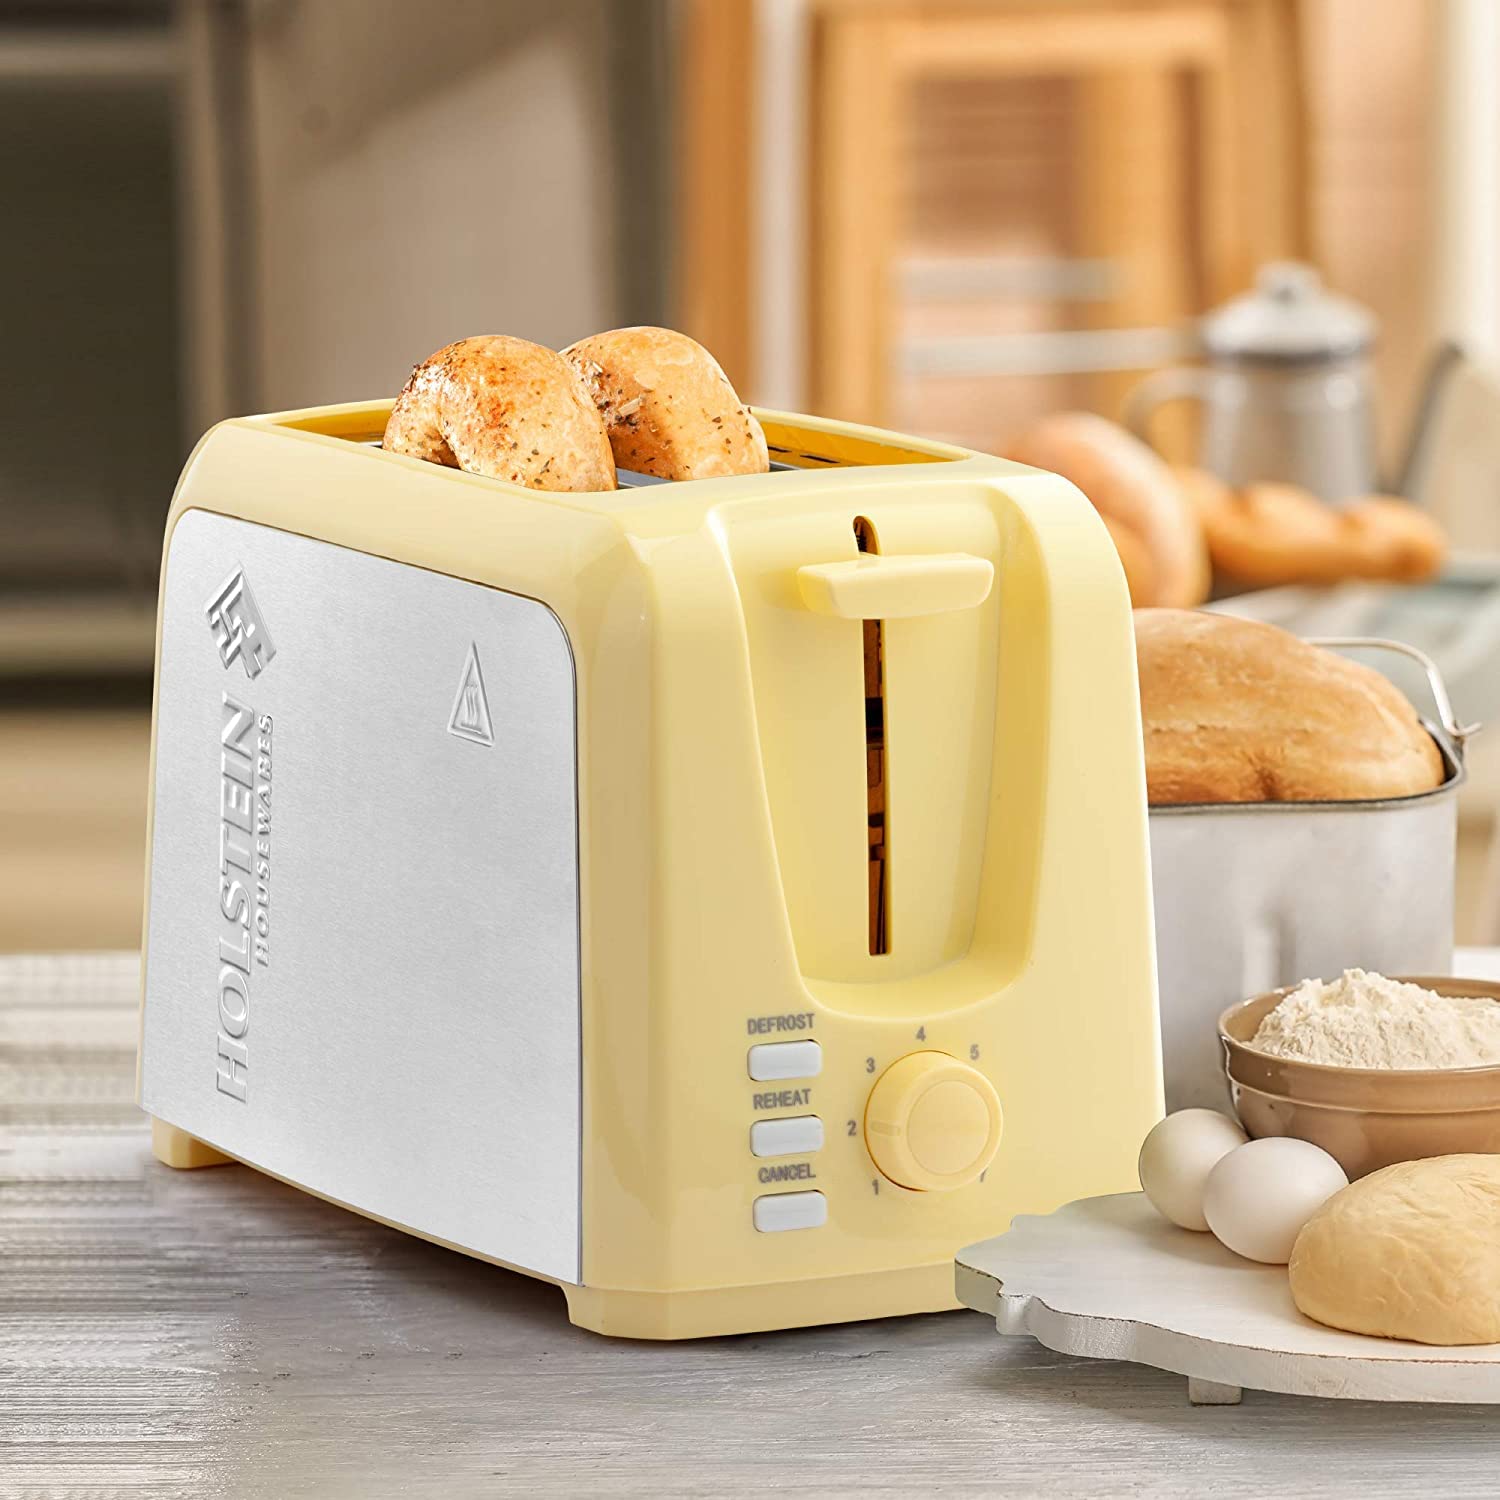 Holstein Housewares - 2-Slice Toaster with 7 Browning Control Settings, Yellow/Stainless Steel - Great to Toast Bread, Bagels and Waffles